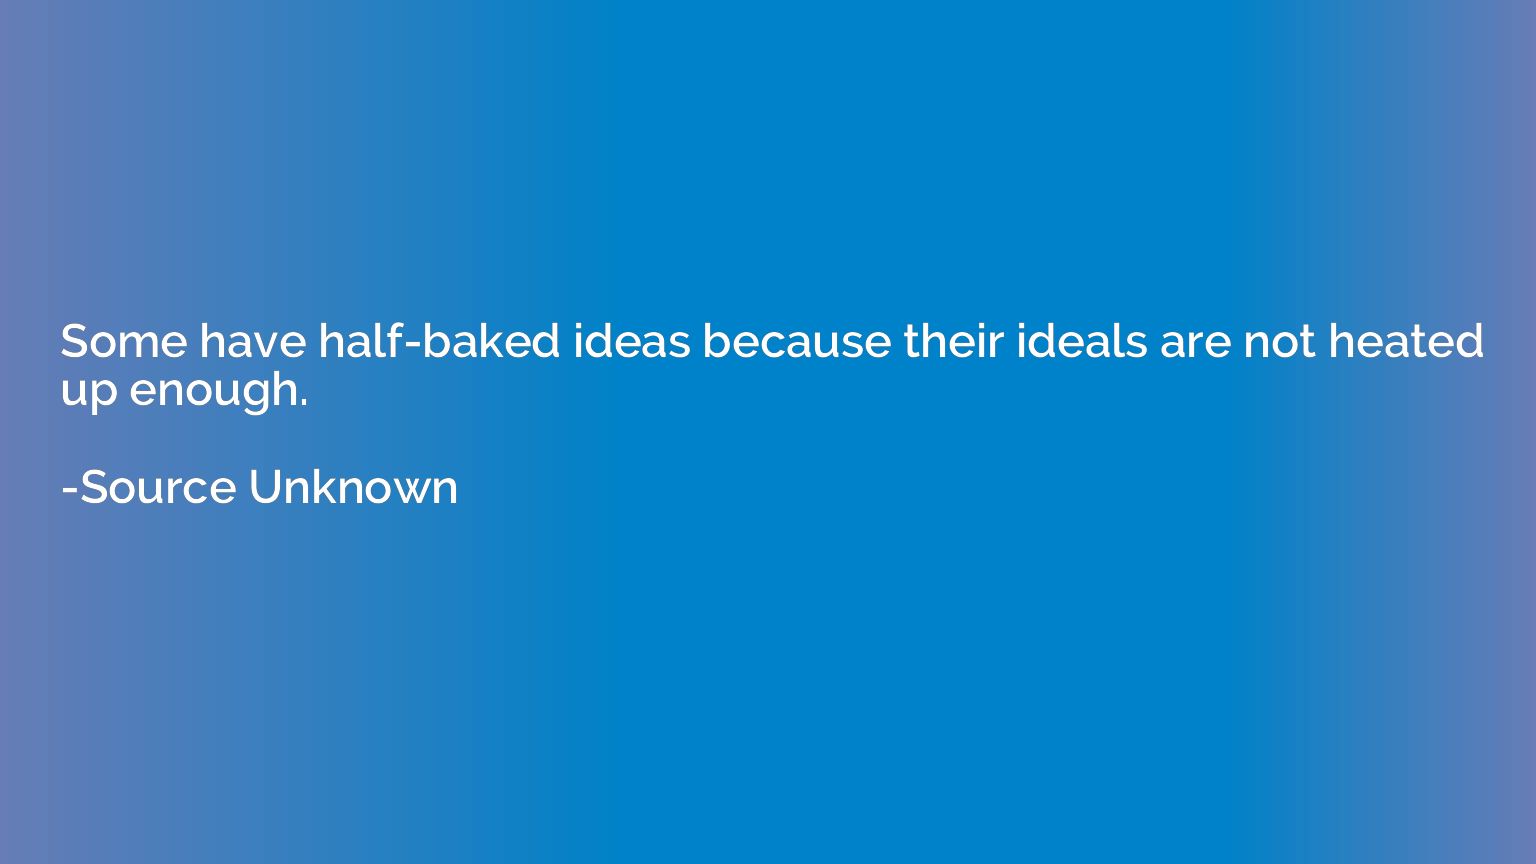 Some have half-baked ideas because their ideals are not heat